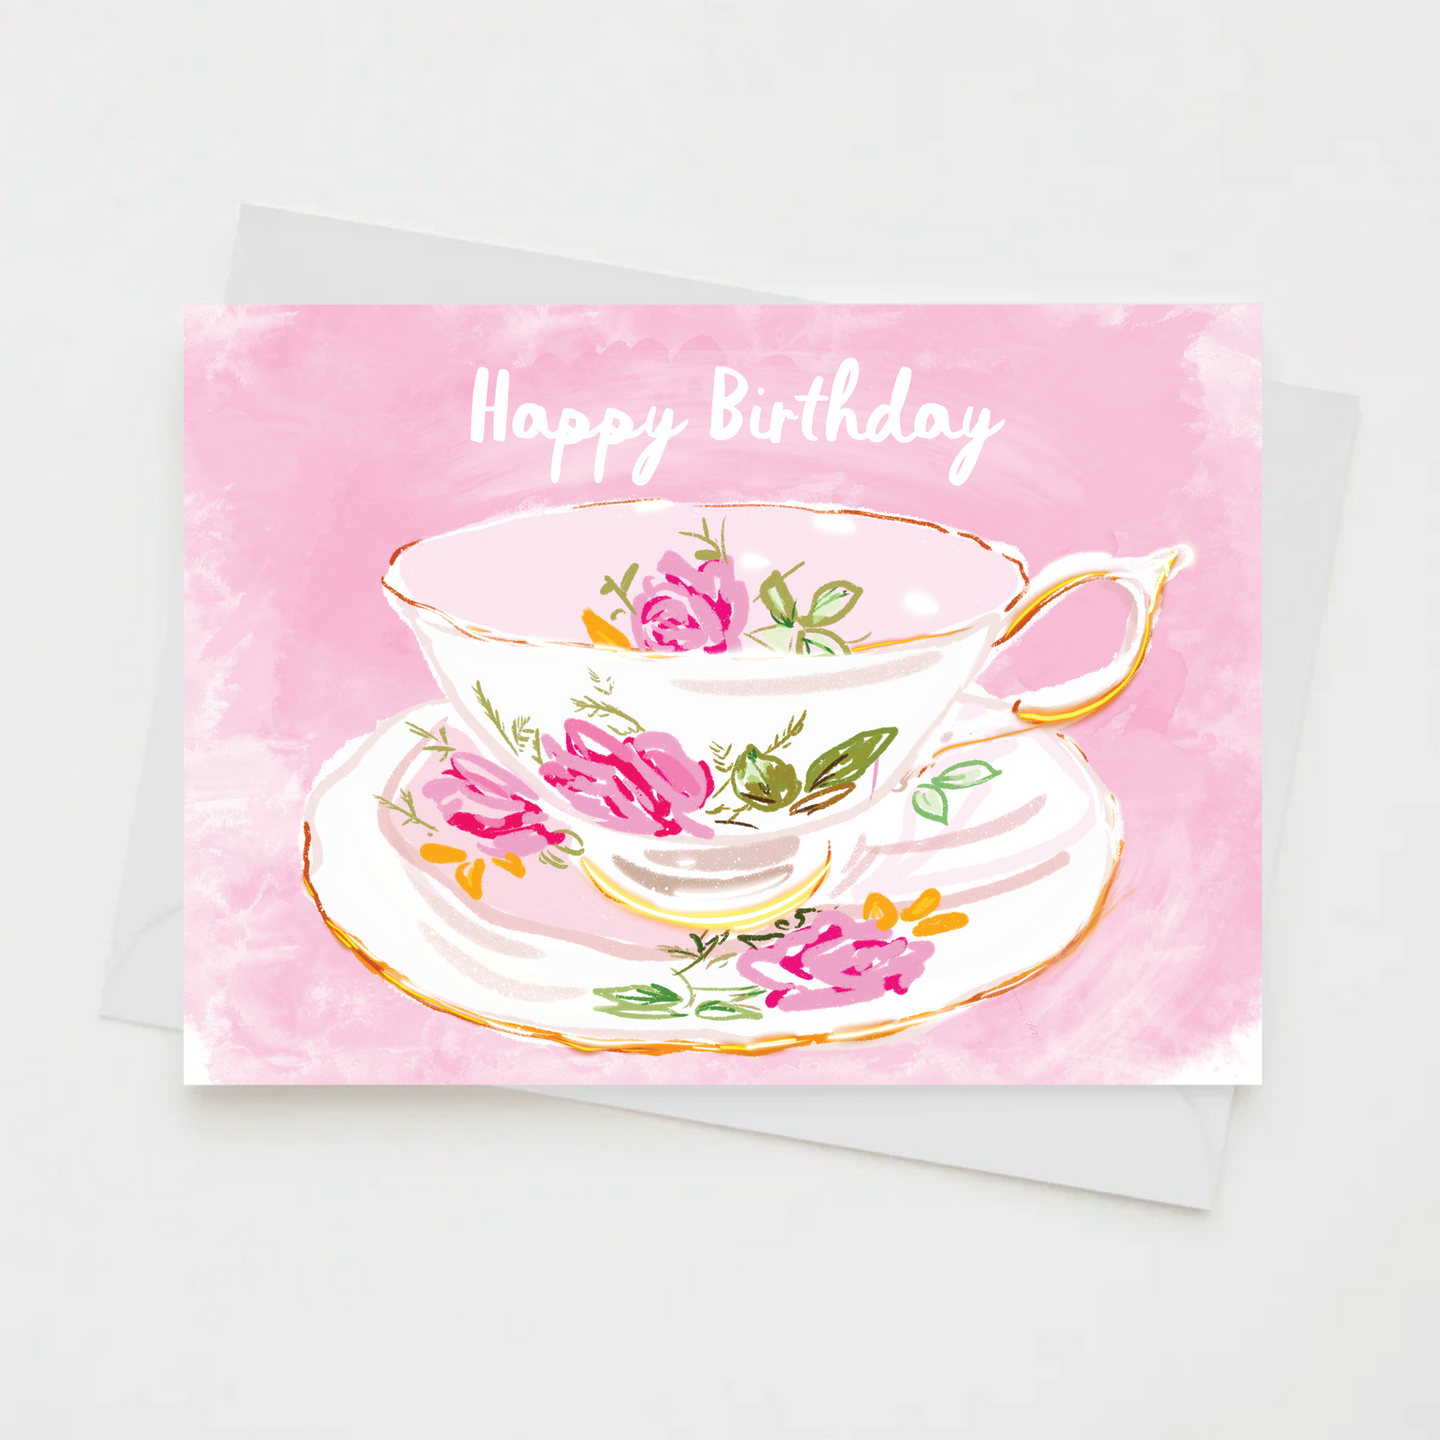 Your Cup of Tea Birthday Greeting Card - Set of 6